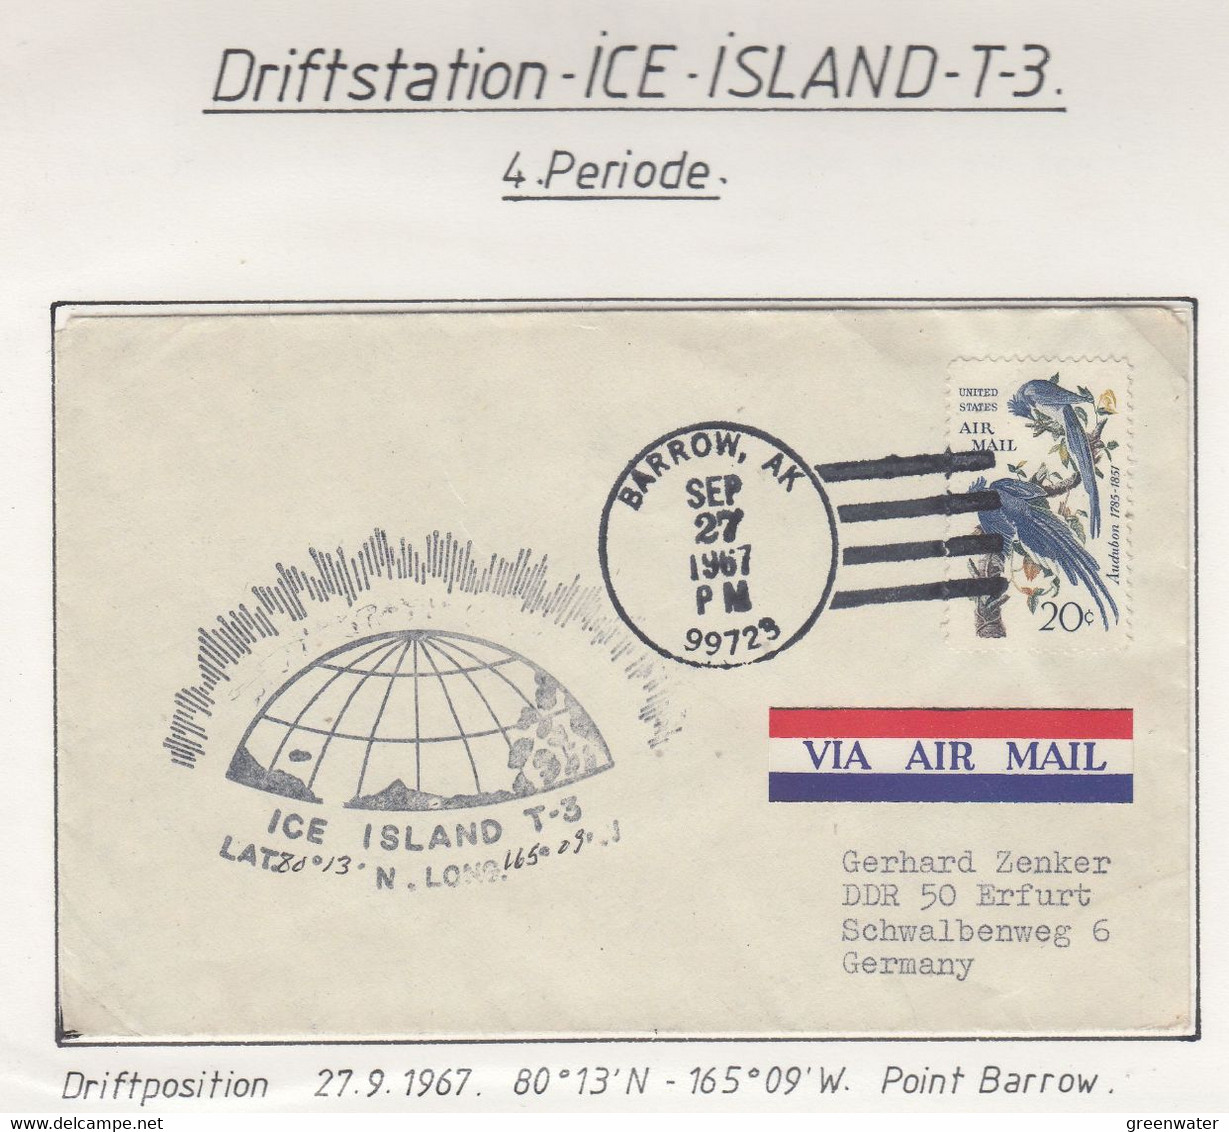 USA Driftstation ICE-ISLAND T-3 Cover Ca  Ice Island T-3 Periode 4 Ca Sep 27 1967  (DR124) - Stations Scientifiques & Stations Dérivantes Arctiques